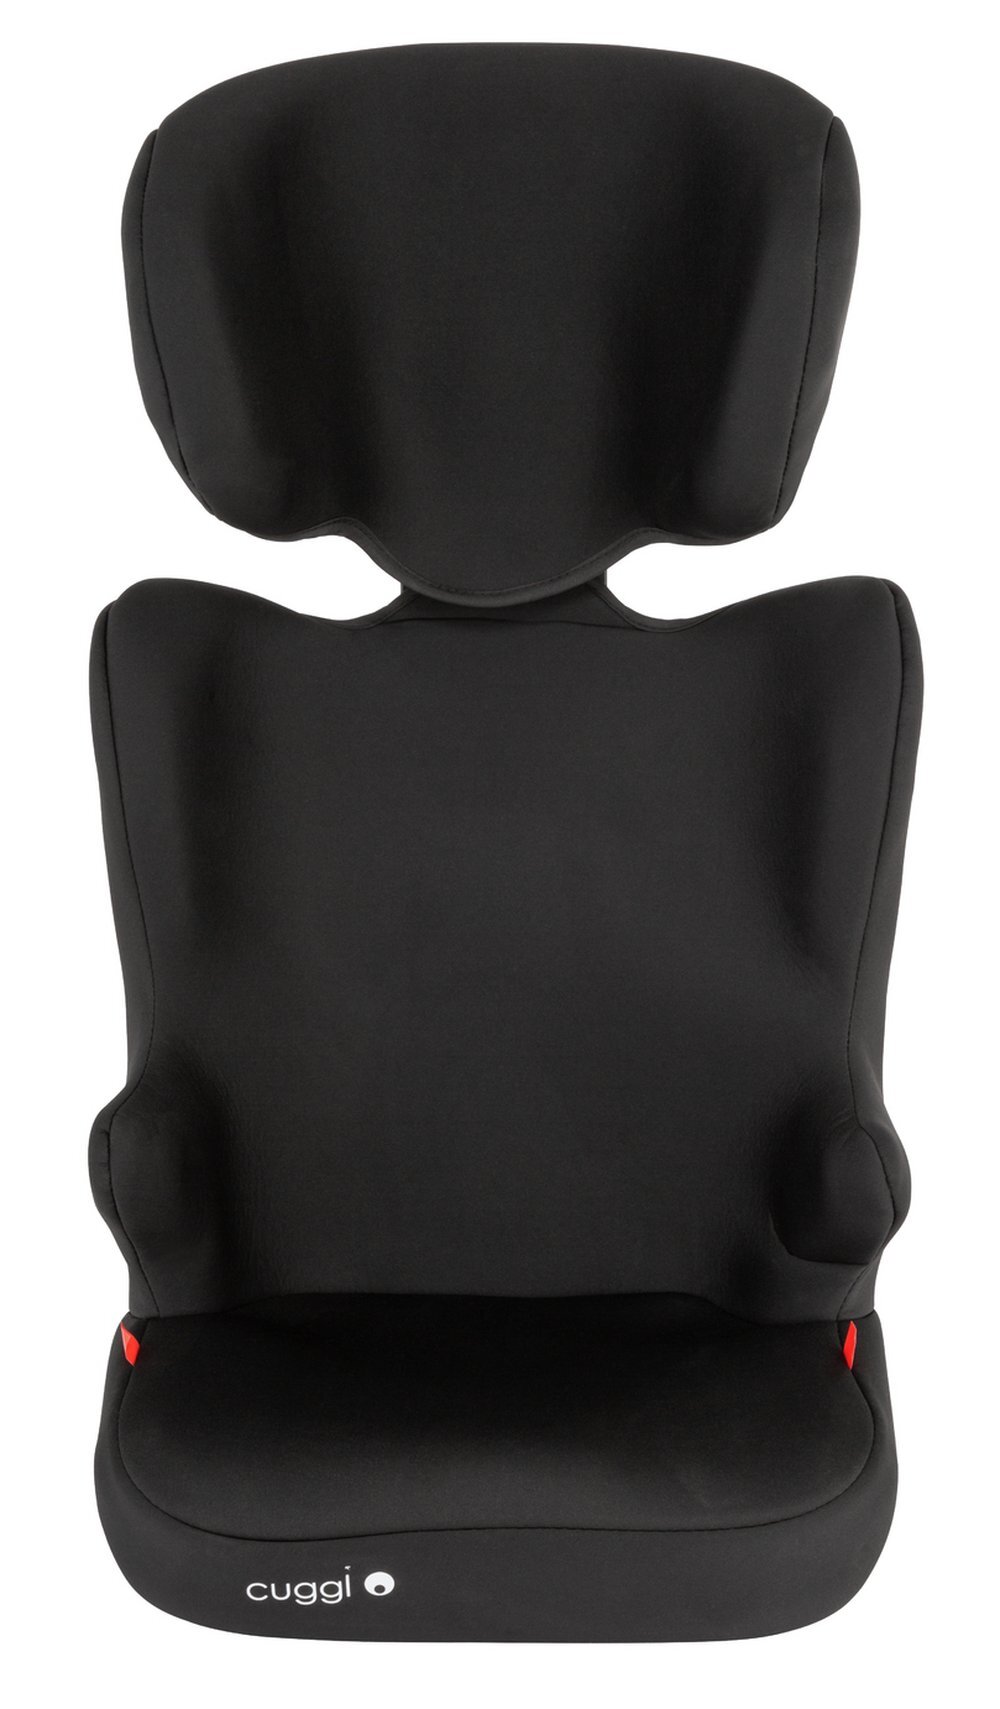 NEW CUGGL SWALLOW GROUP BABY CAR SEAT 18PCS £12.49each NOW £9.99